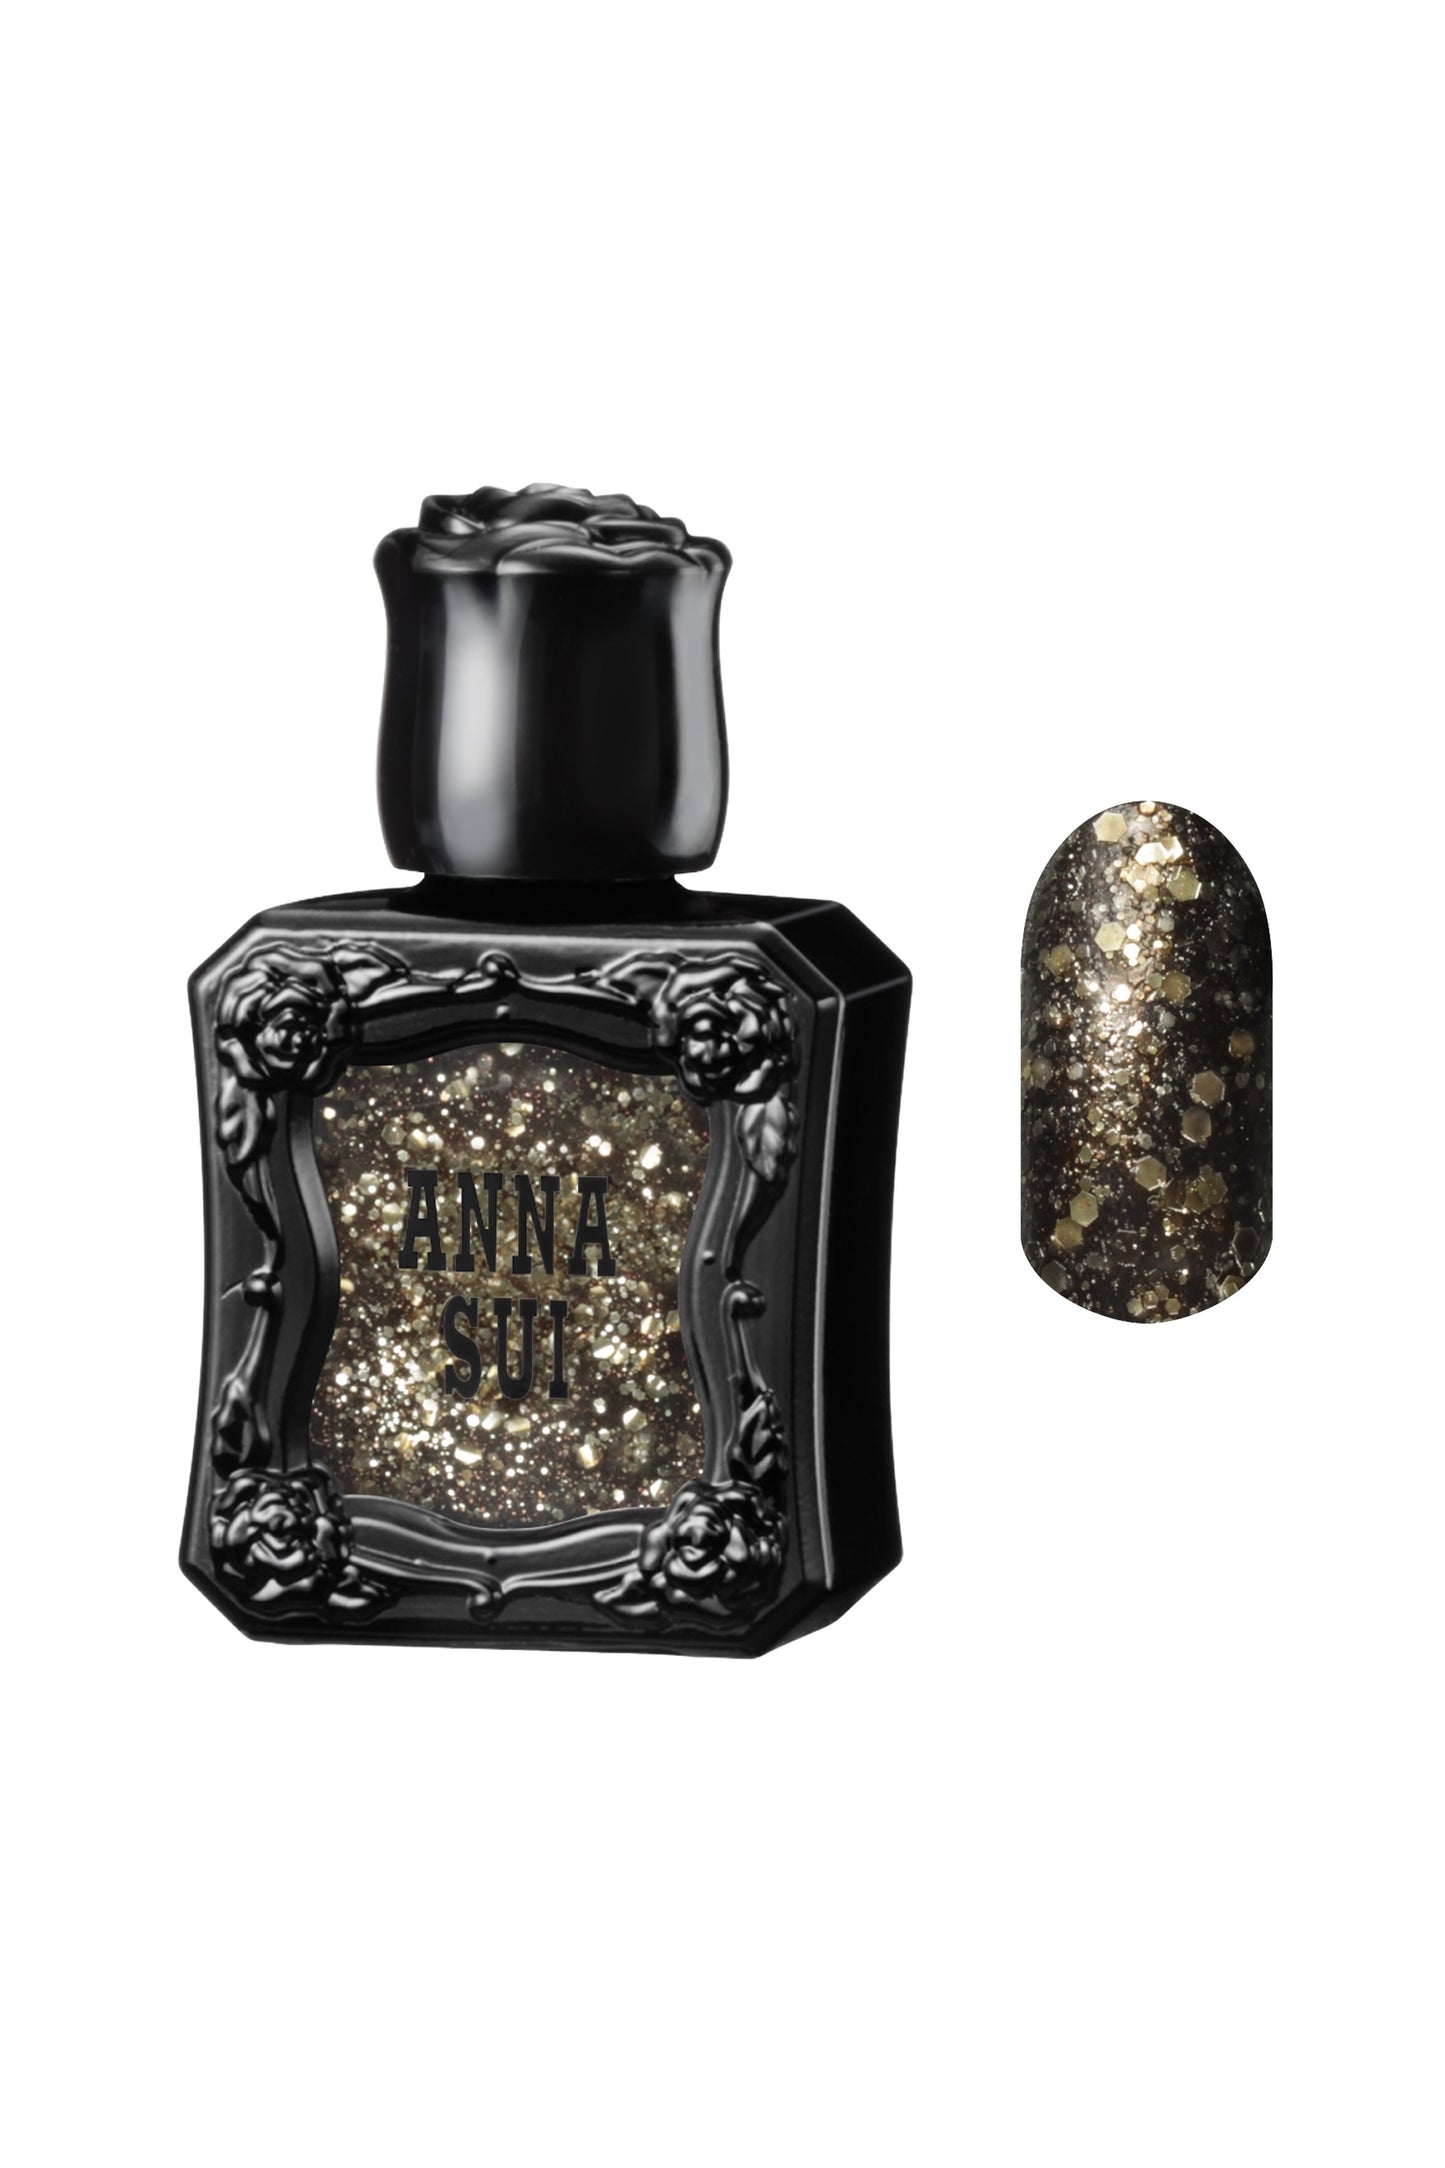 DAZZLING GOLD Nail Polish bottle raised rose pattern, Anna Sui in black over nail colors in front